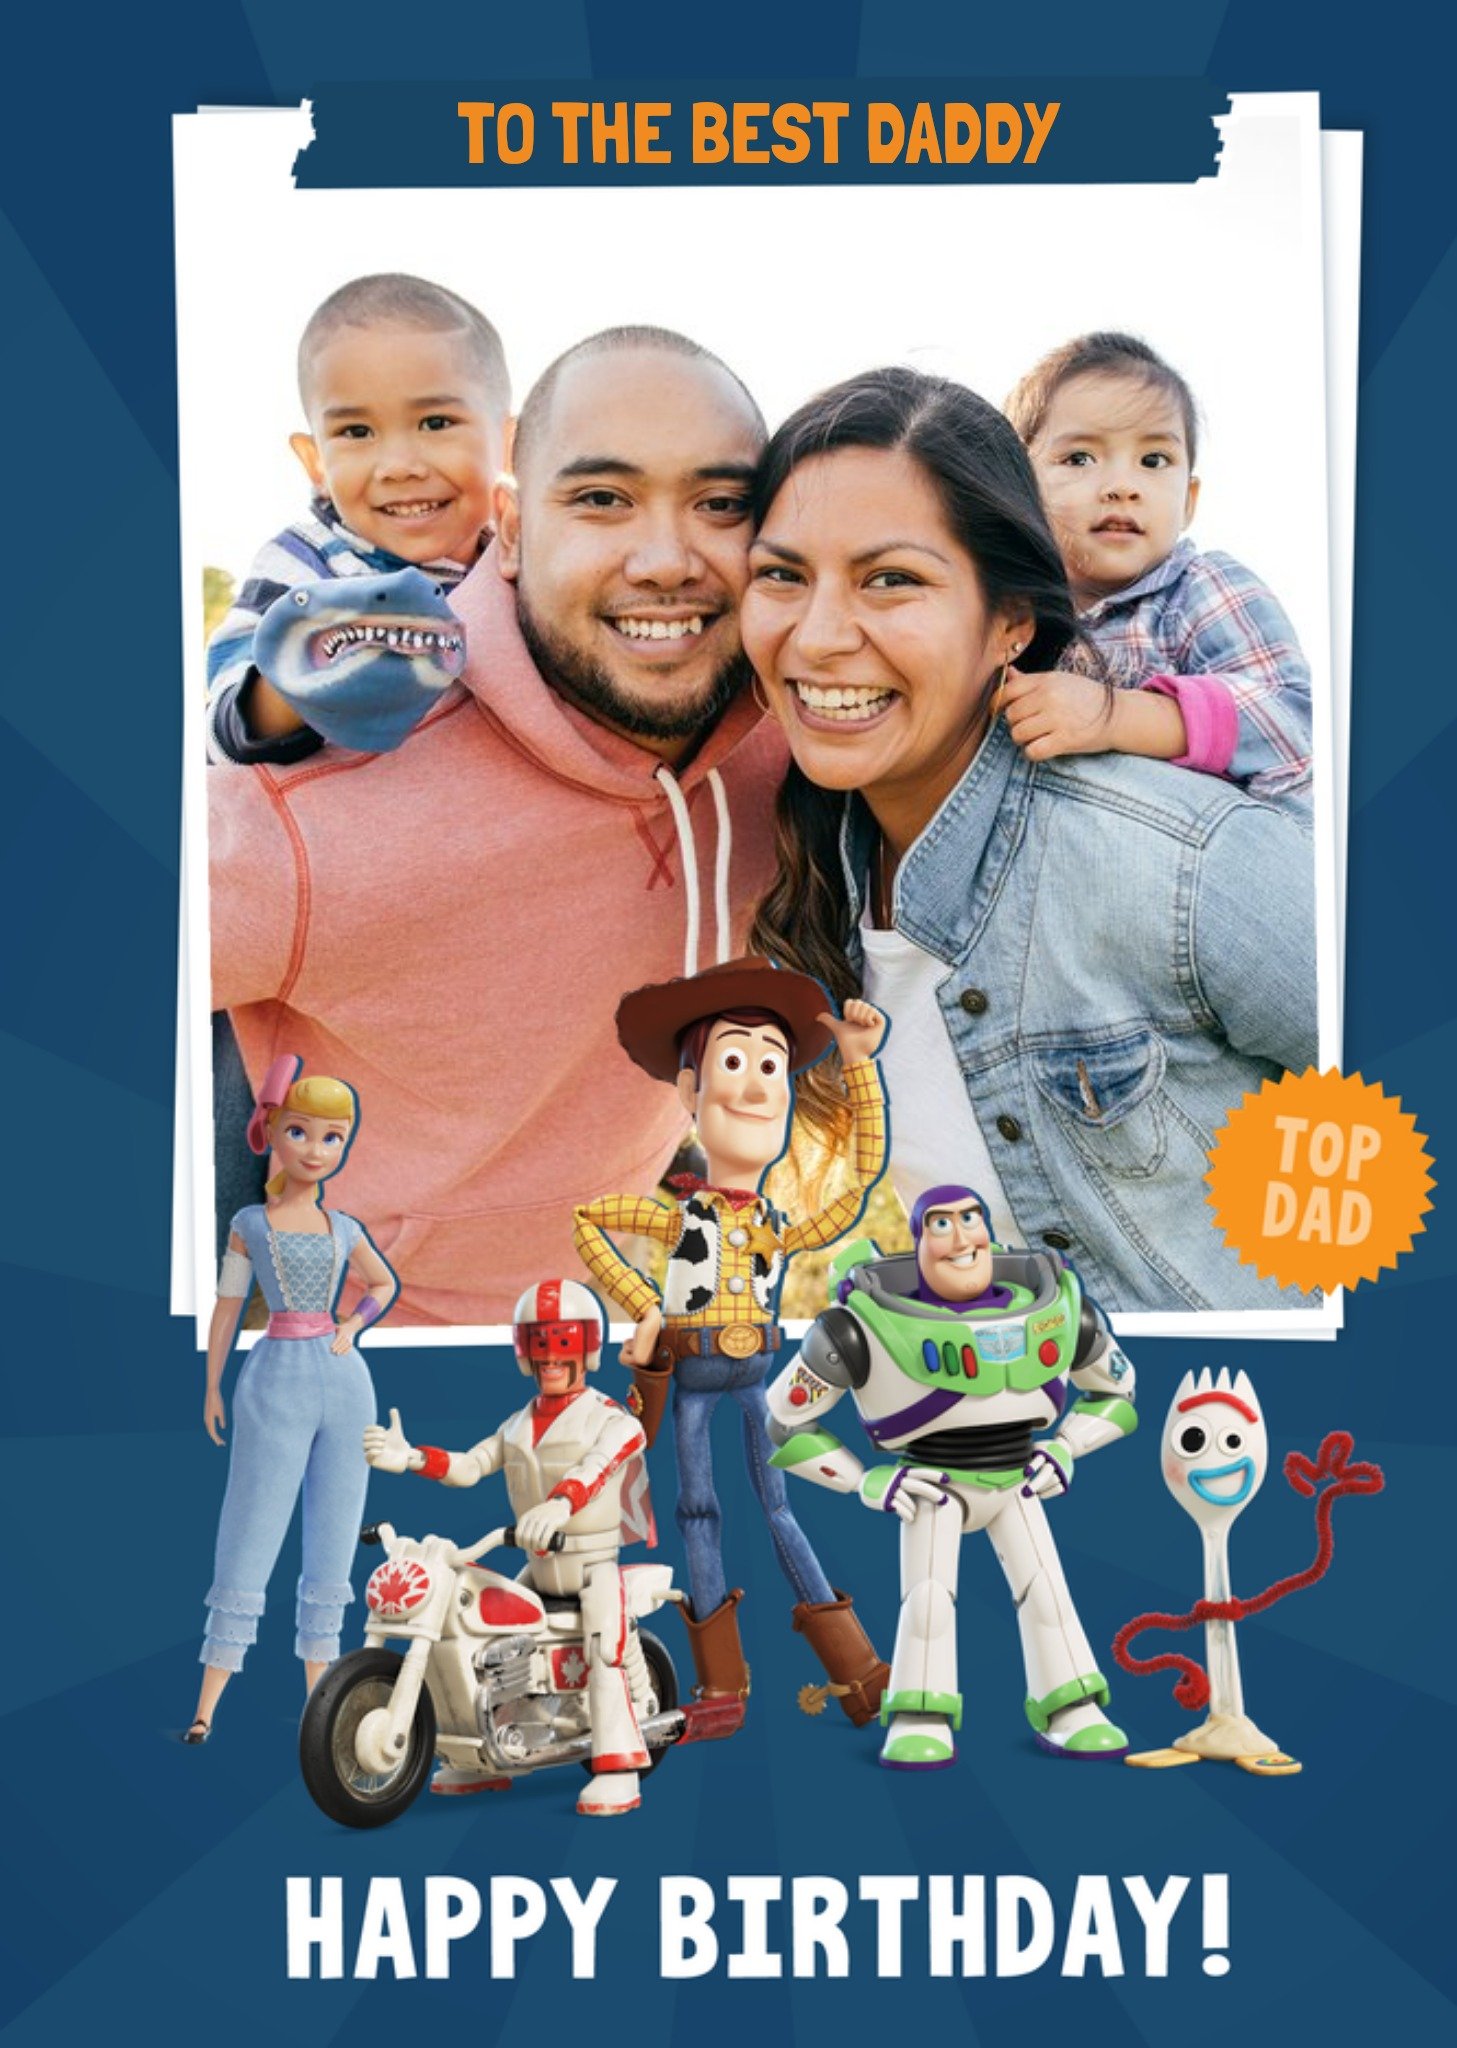 Toy Story 4 - Dad Birthday Card - To The Best Daddy - Photo Upload Ecard